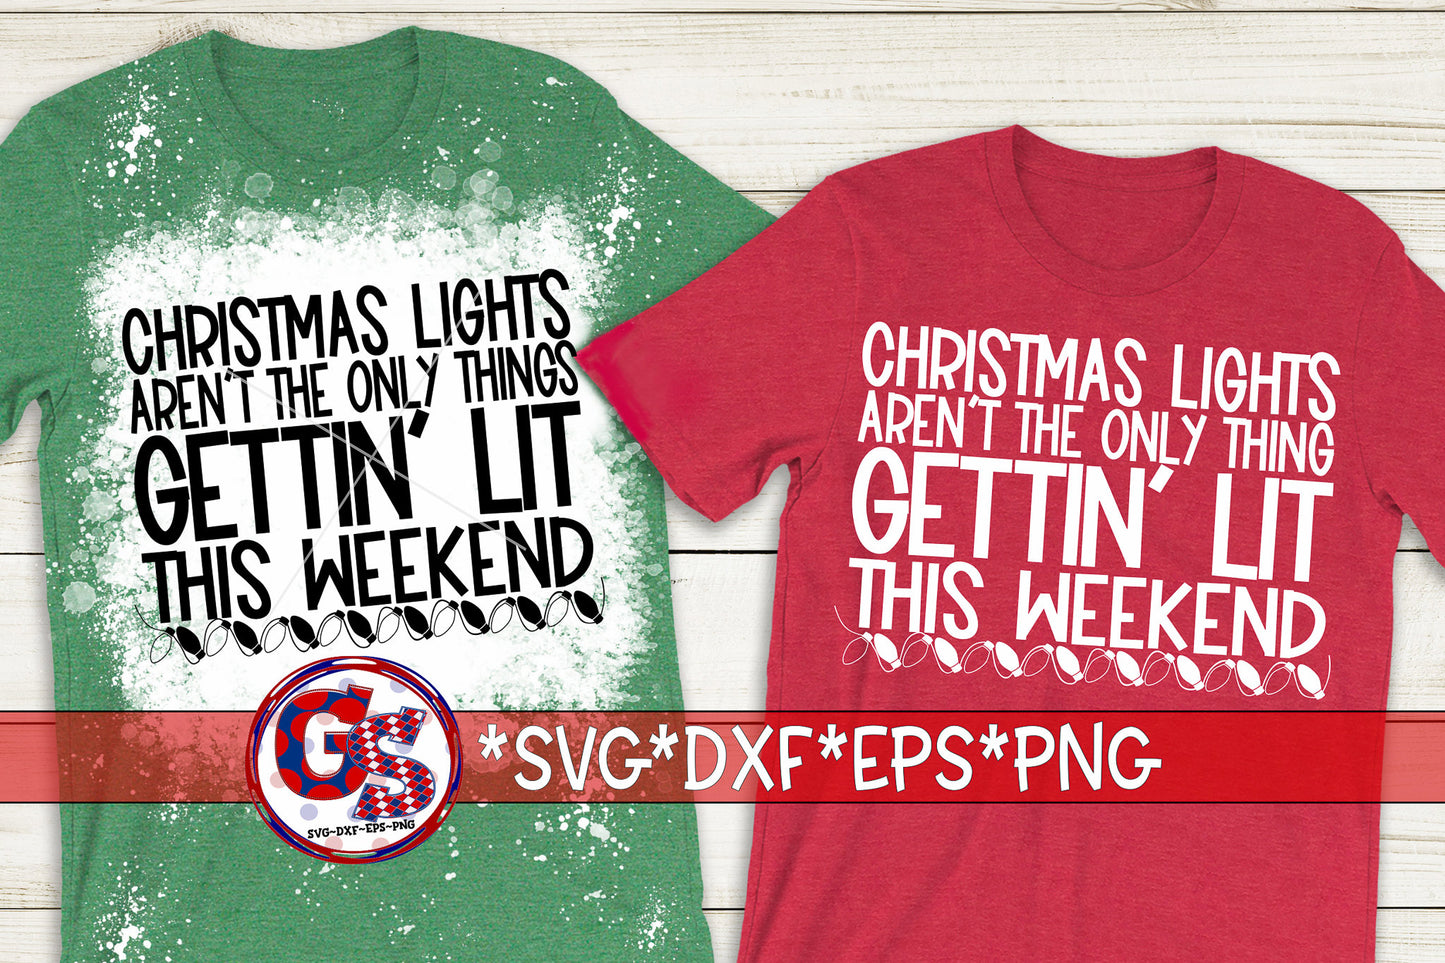 Christmas Lights Aren&#39;t The Only Things Gettin Lit This Weekend svg dxf eps png. Christmas SvG | Christmas DxF | Instant Download Cut File